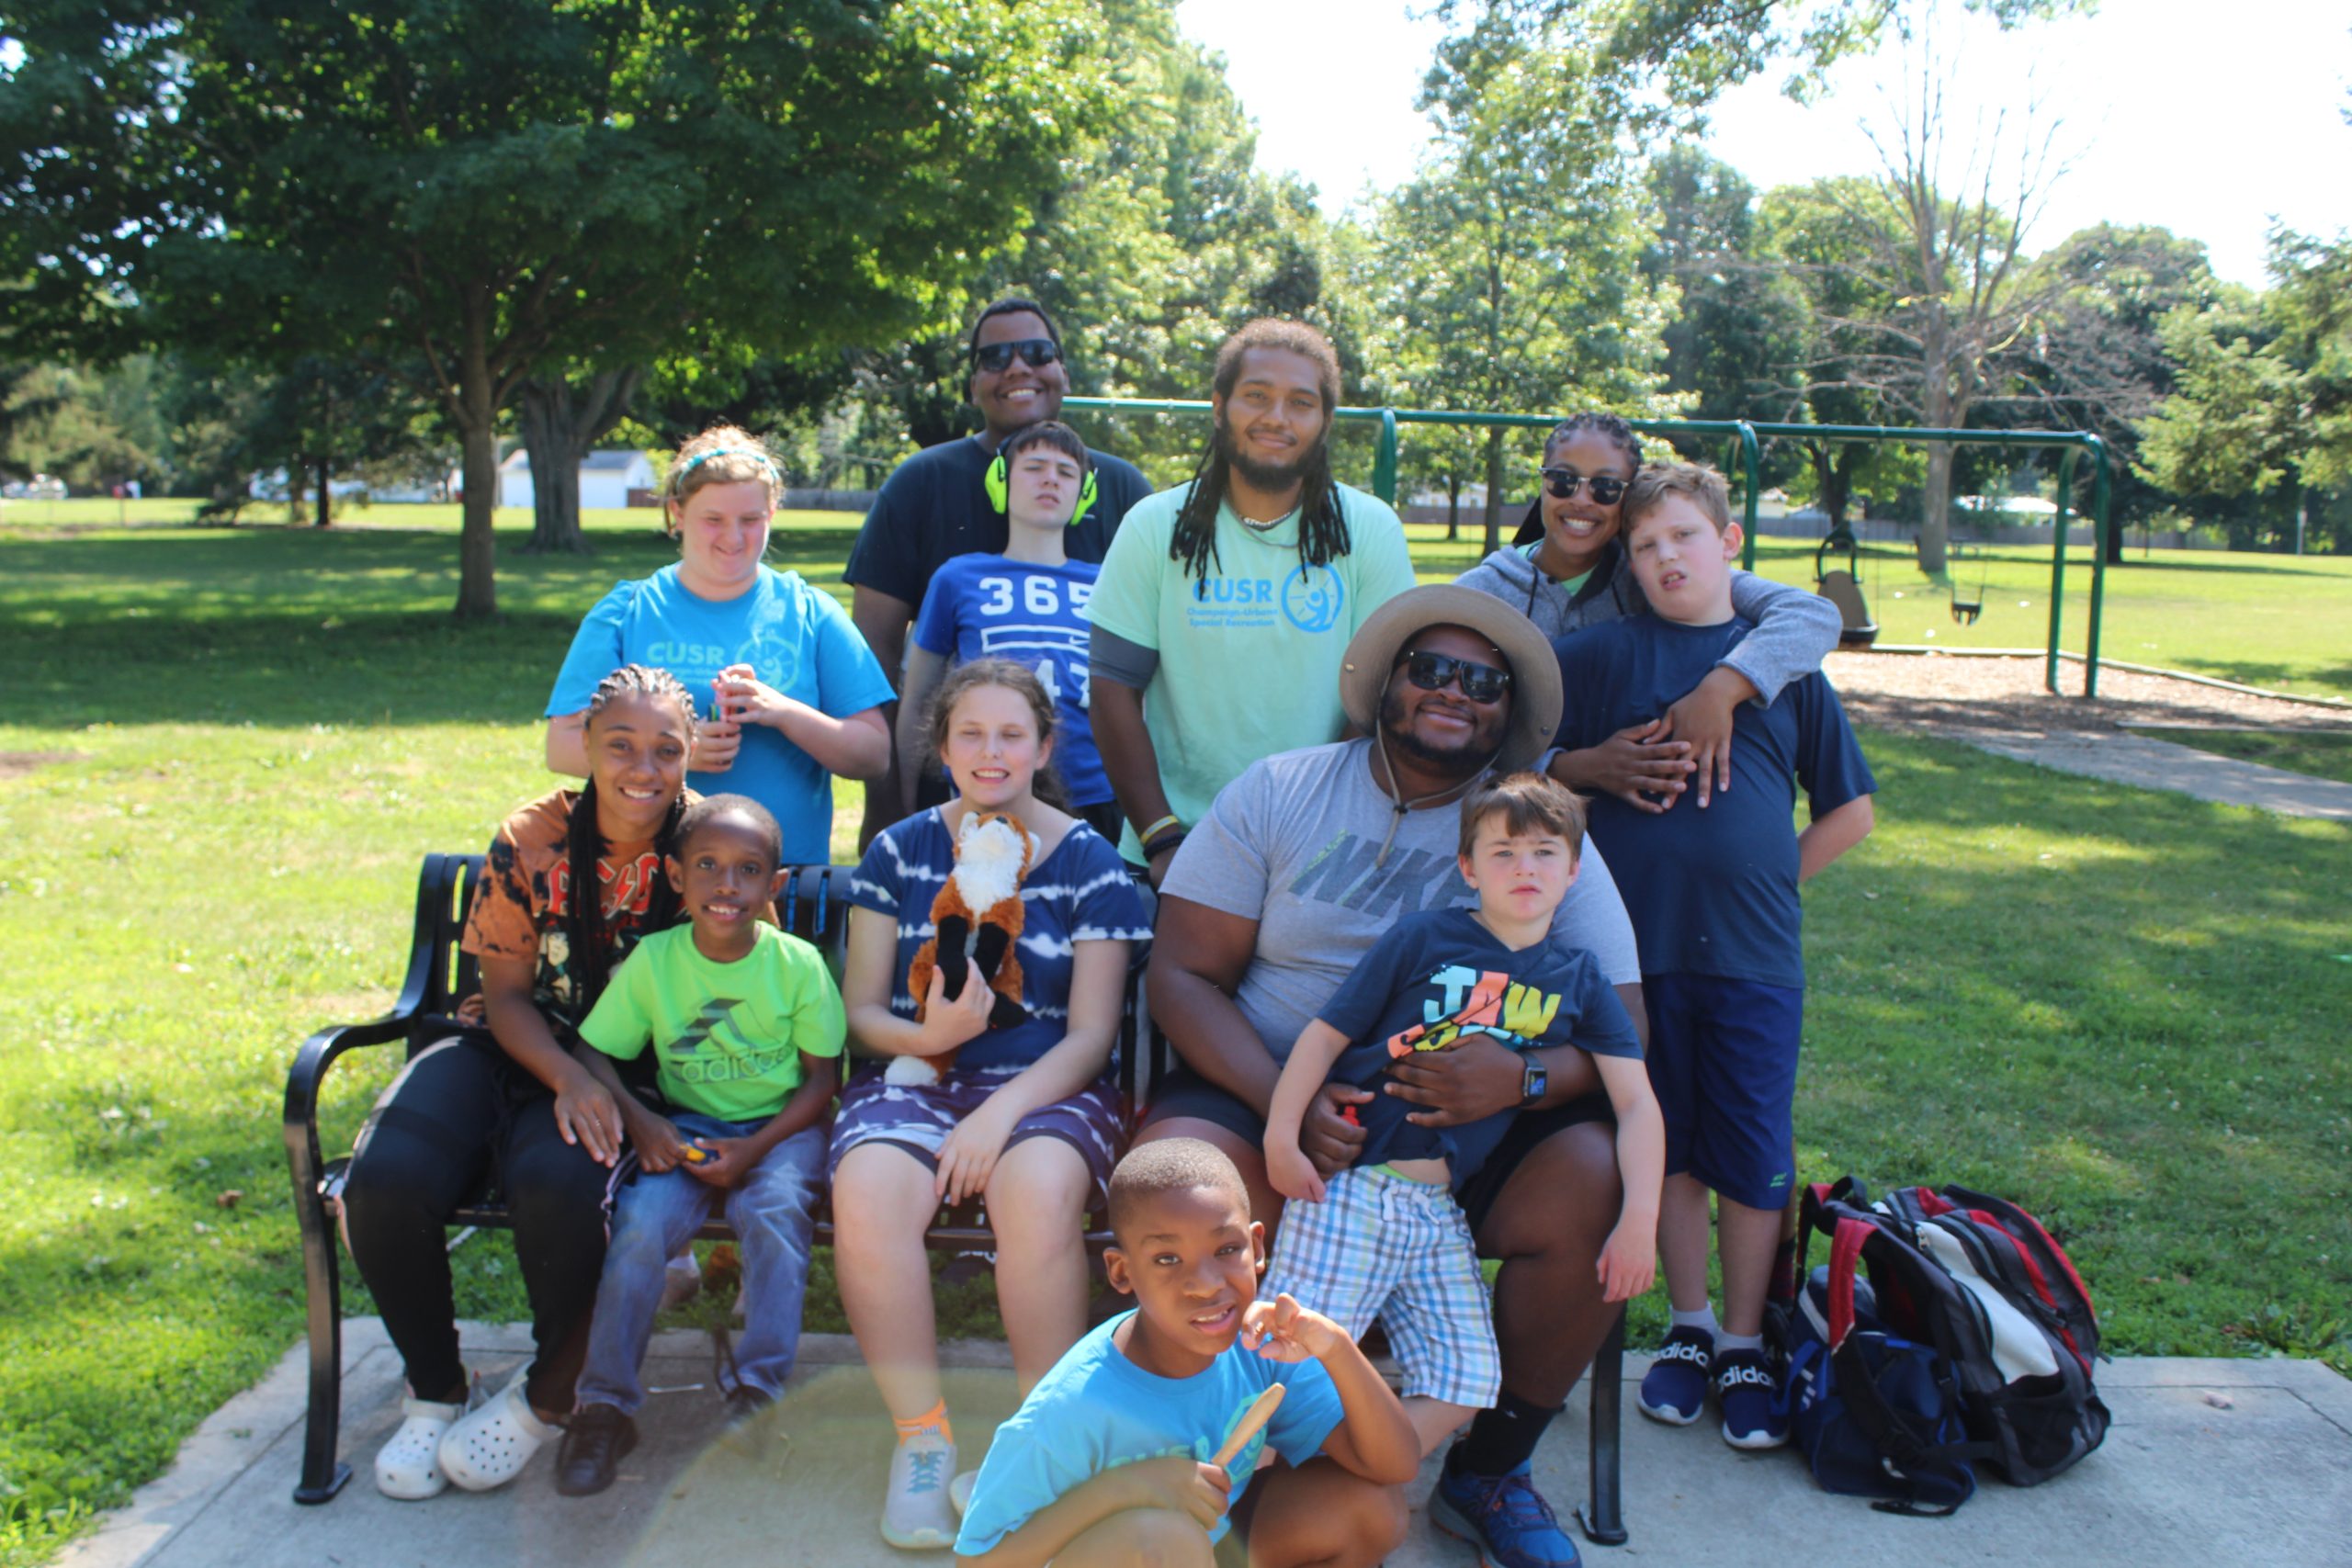 Campers at the park with a staff member